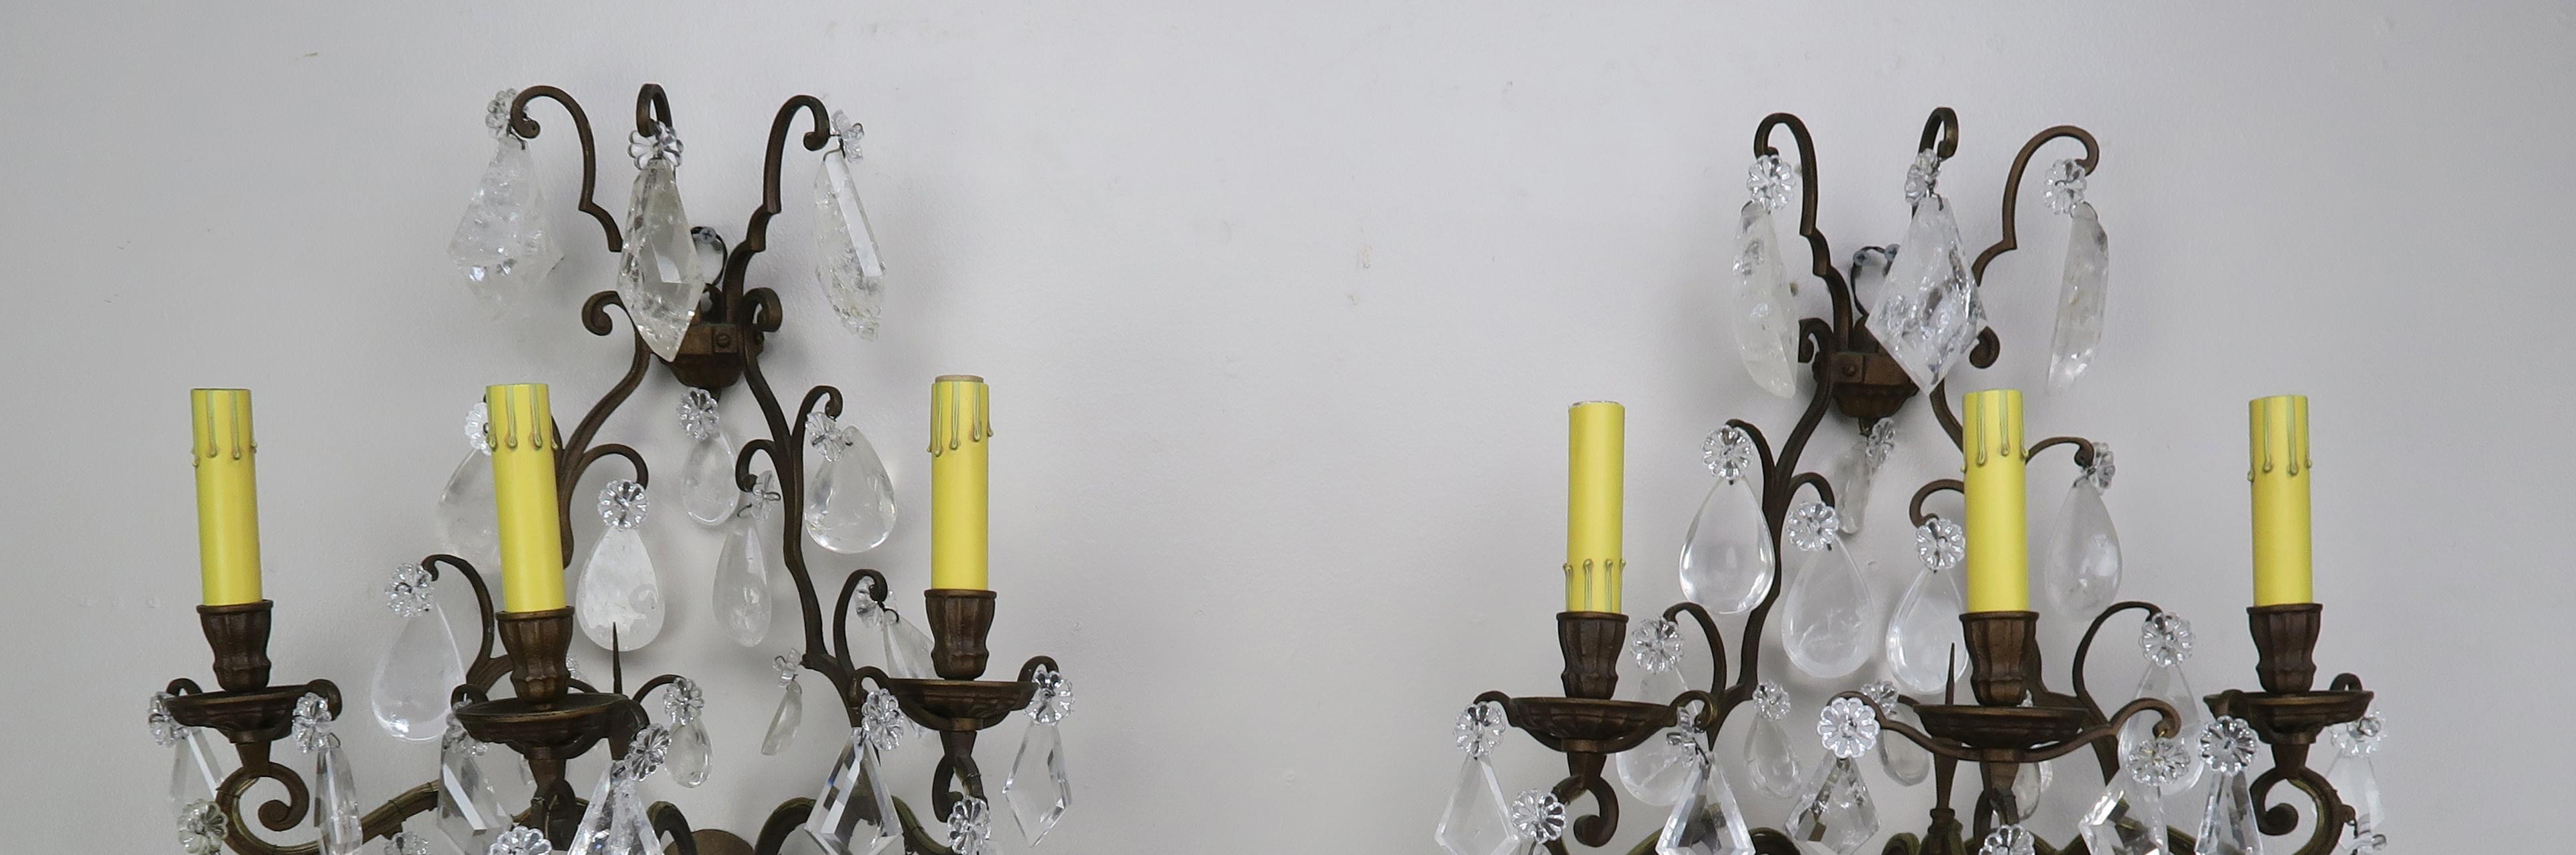 Pair of 3-light French rock crystal sconces adorned with both kite shape rock crystal and almond shape rock crystal throughout. The sconces are newly rewired and ready to install.